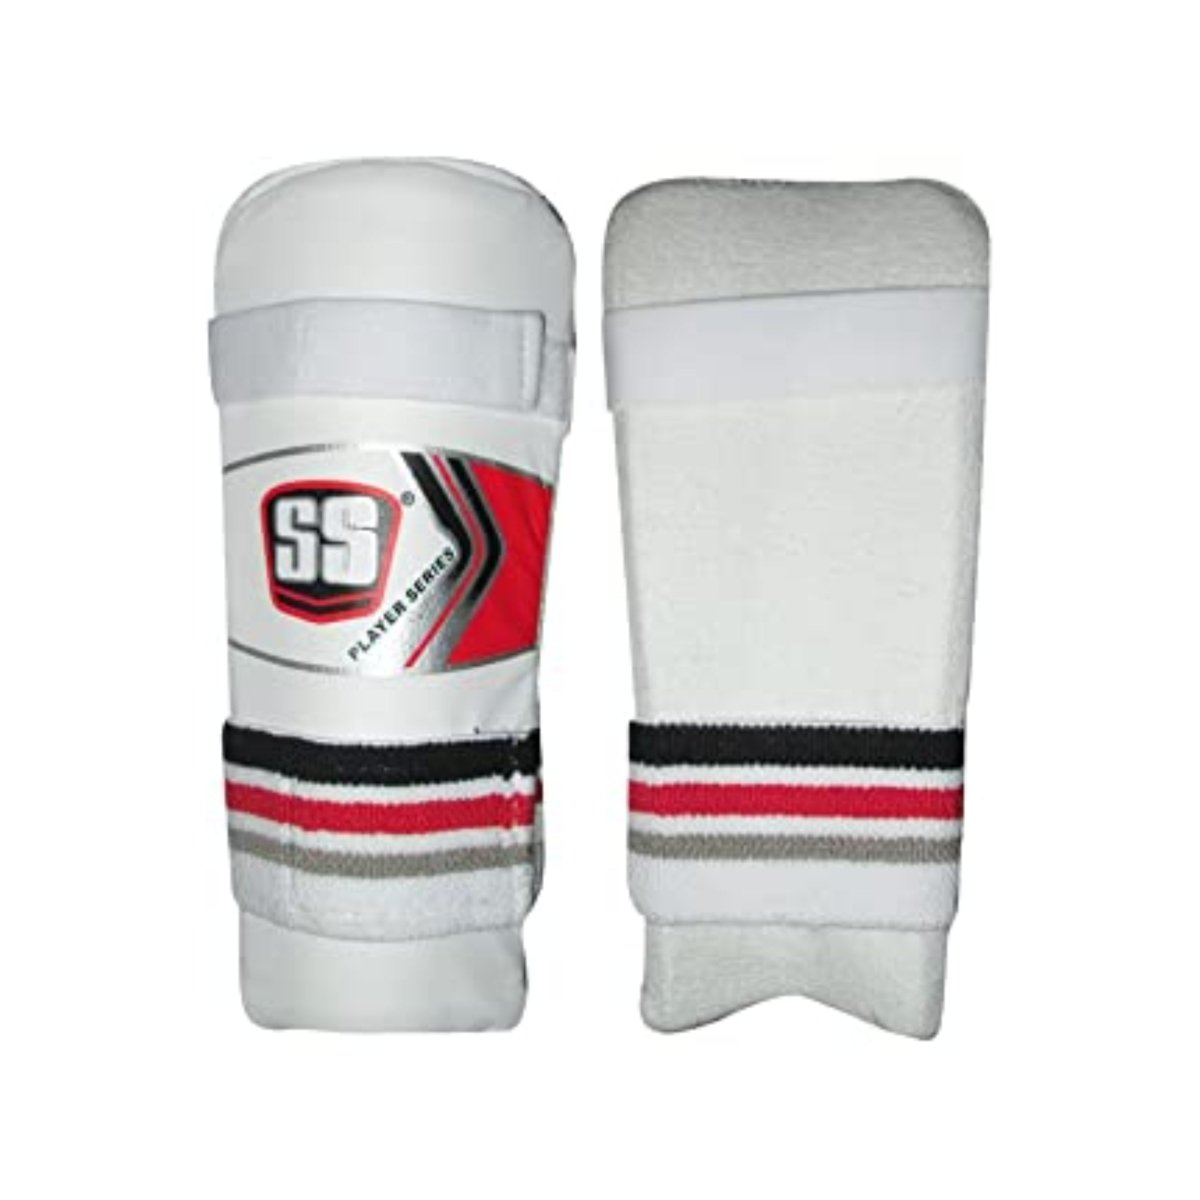 SS Players Cricket Elbow Guard.